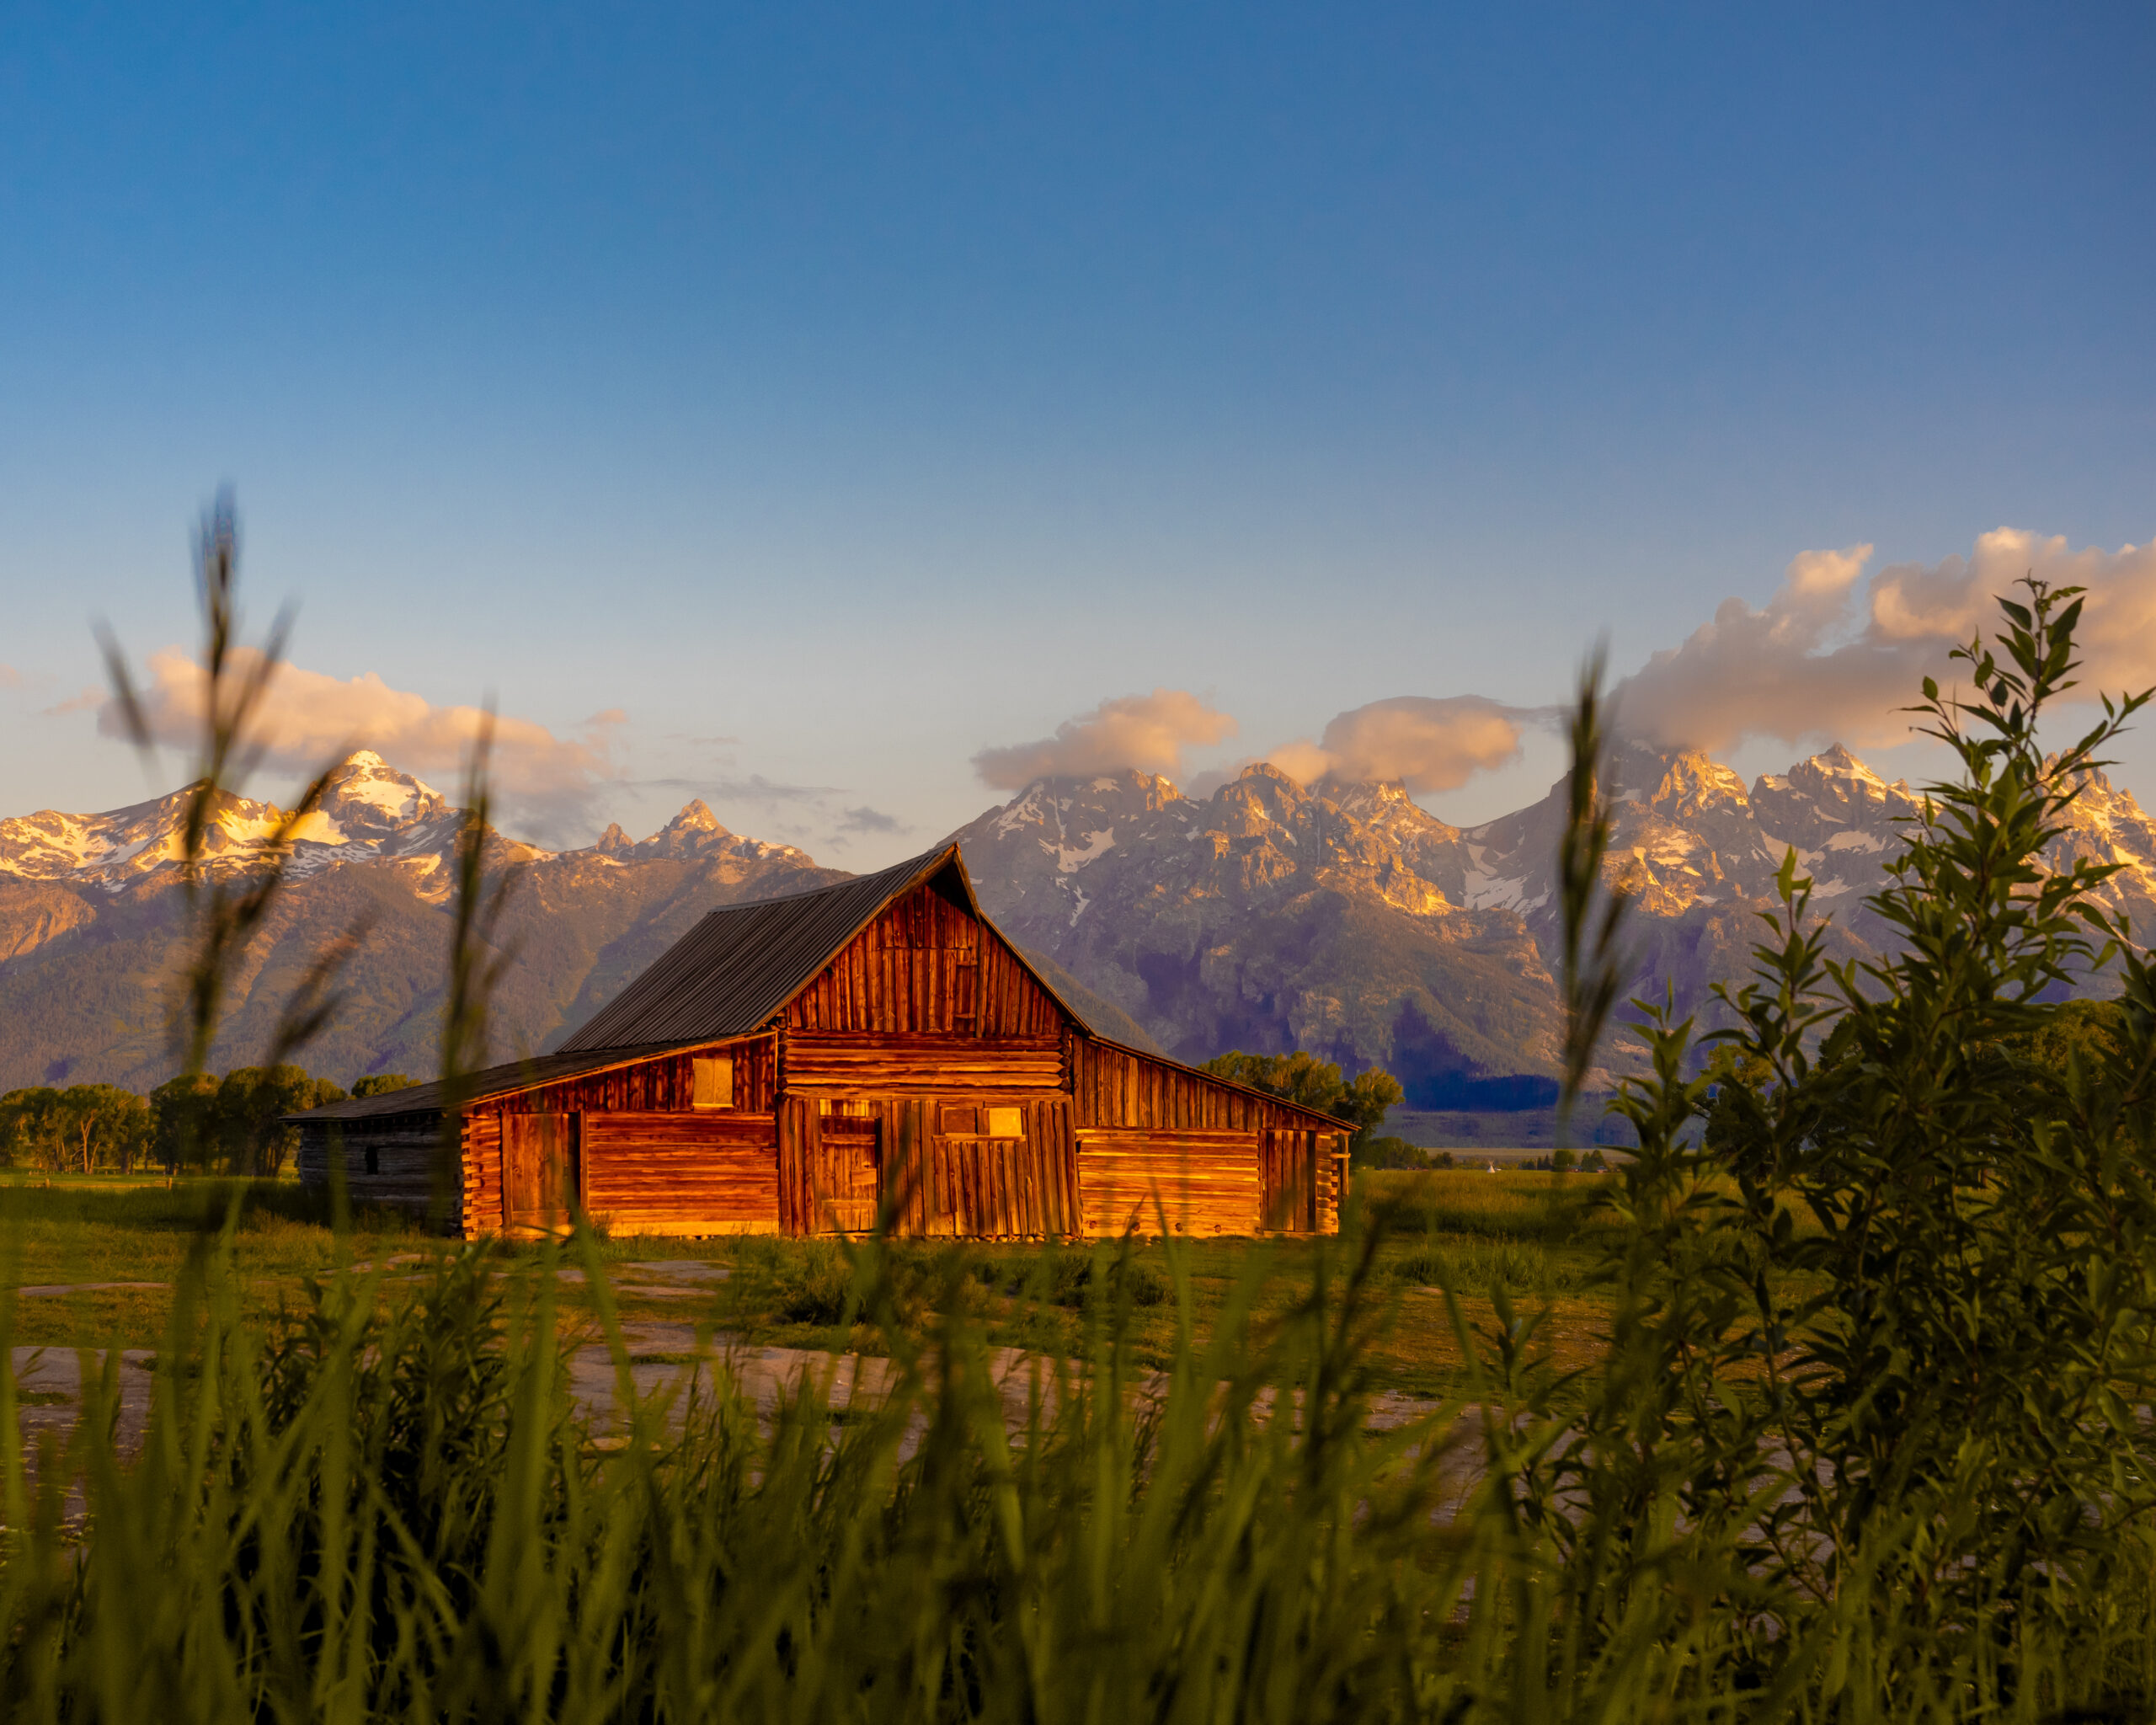 The famous Moulton Barn on Mormon Row in Grand Teton National Park at sunrise, with the Grand Tetons in the background and tall grass in the foreground.